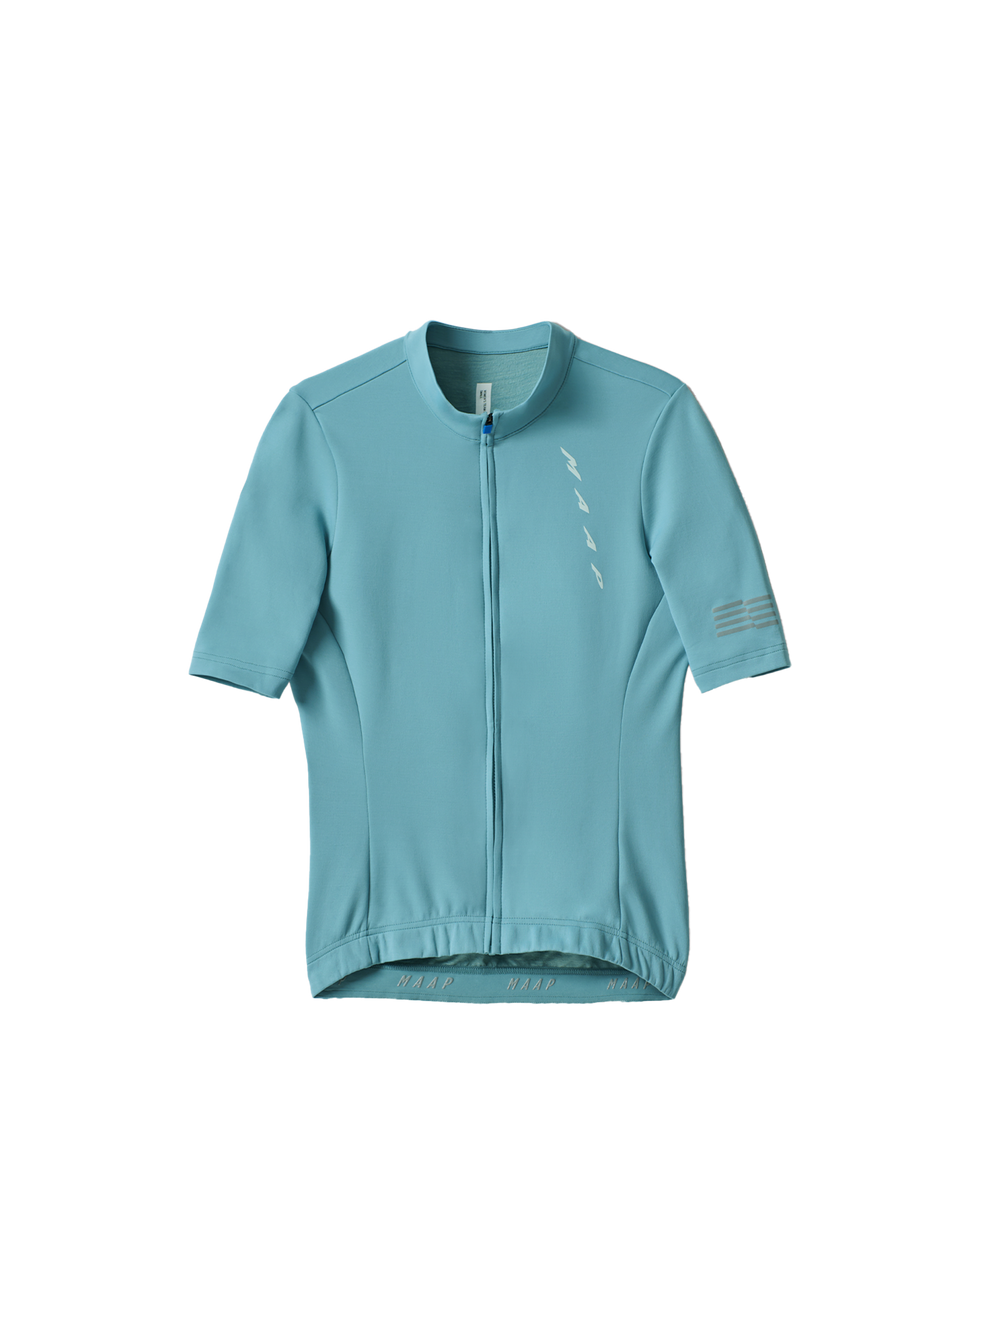 Product Image for Women's Embark Team Jersey